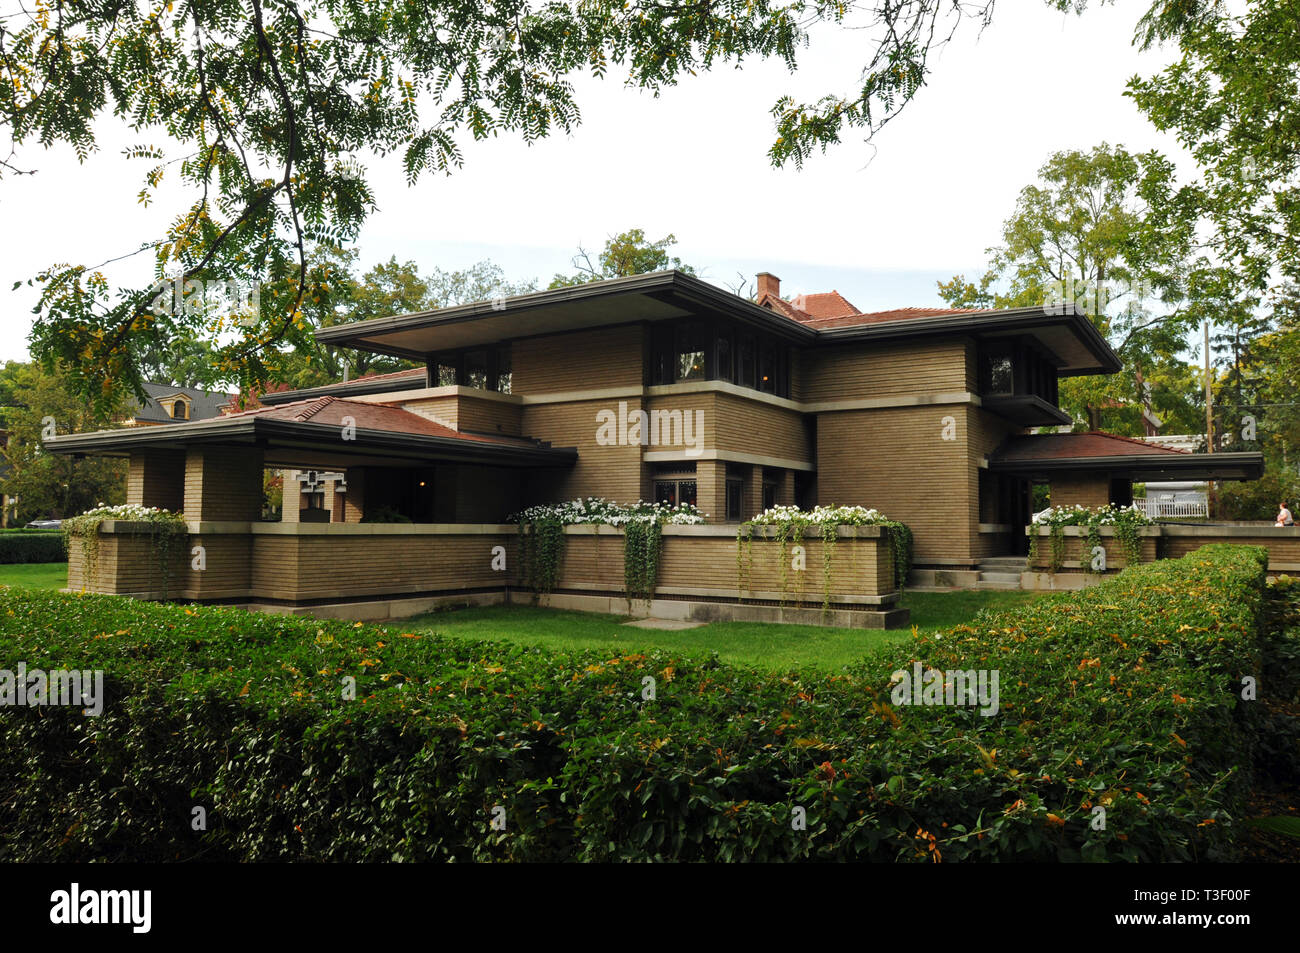 The Meyer May House in Grand Rapids, Michigan. The Prairie-style home, designed by architect Frank Lloyd Wright, was completed in 1909. Stock Photo